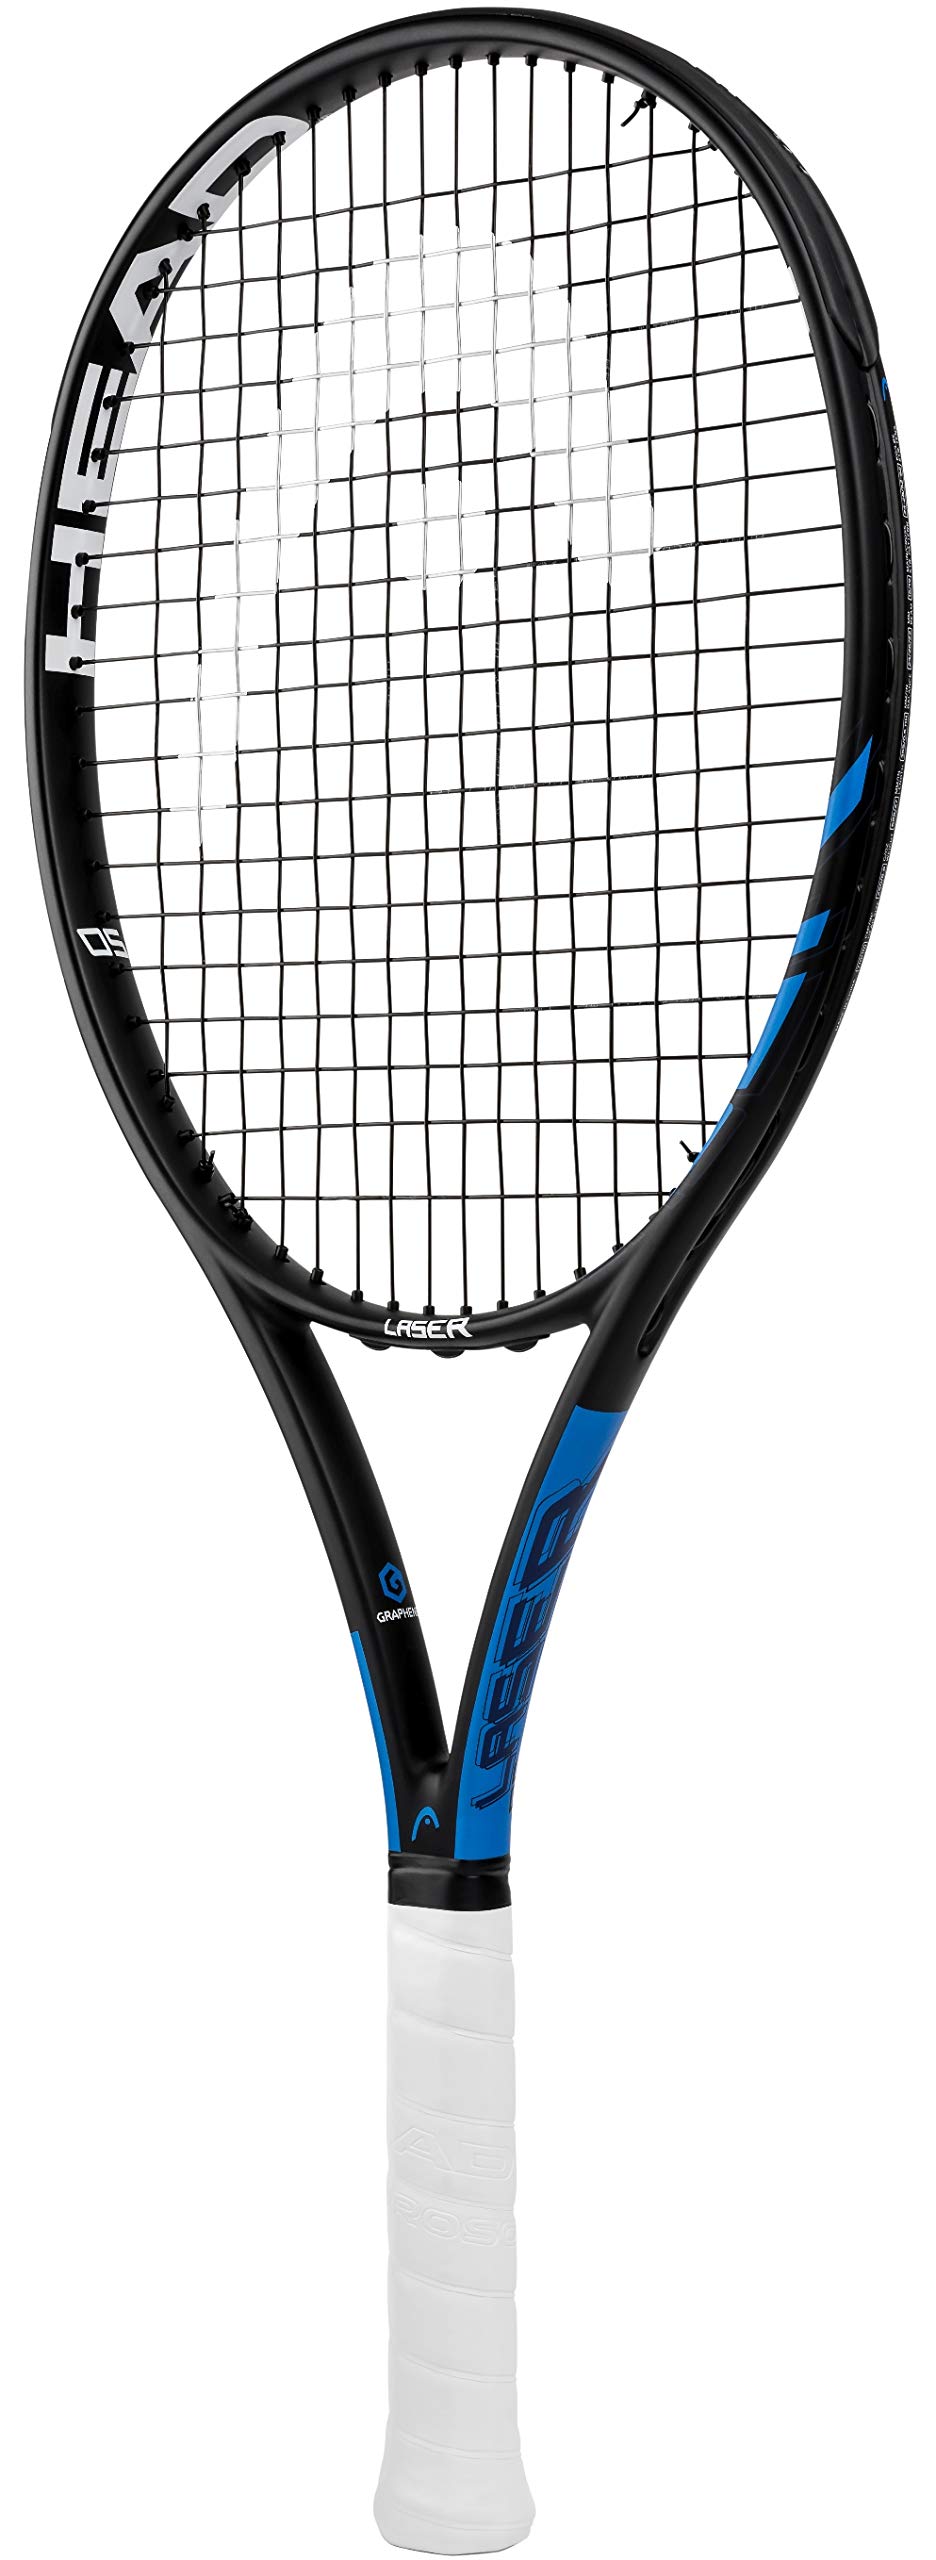 HEAD graphene Laser Oversize Pre-Strung Tennis Racquet with Large Sweetspot and Power , BlackBlue